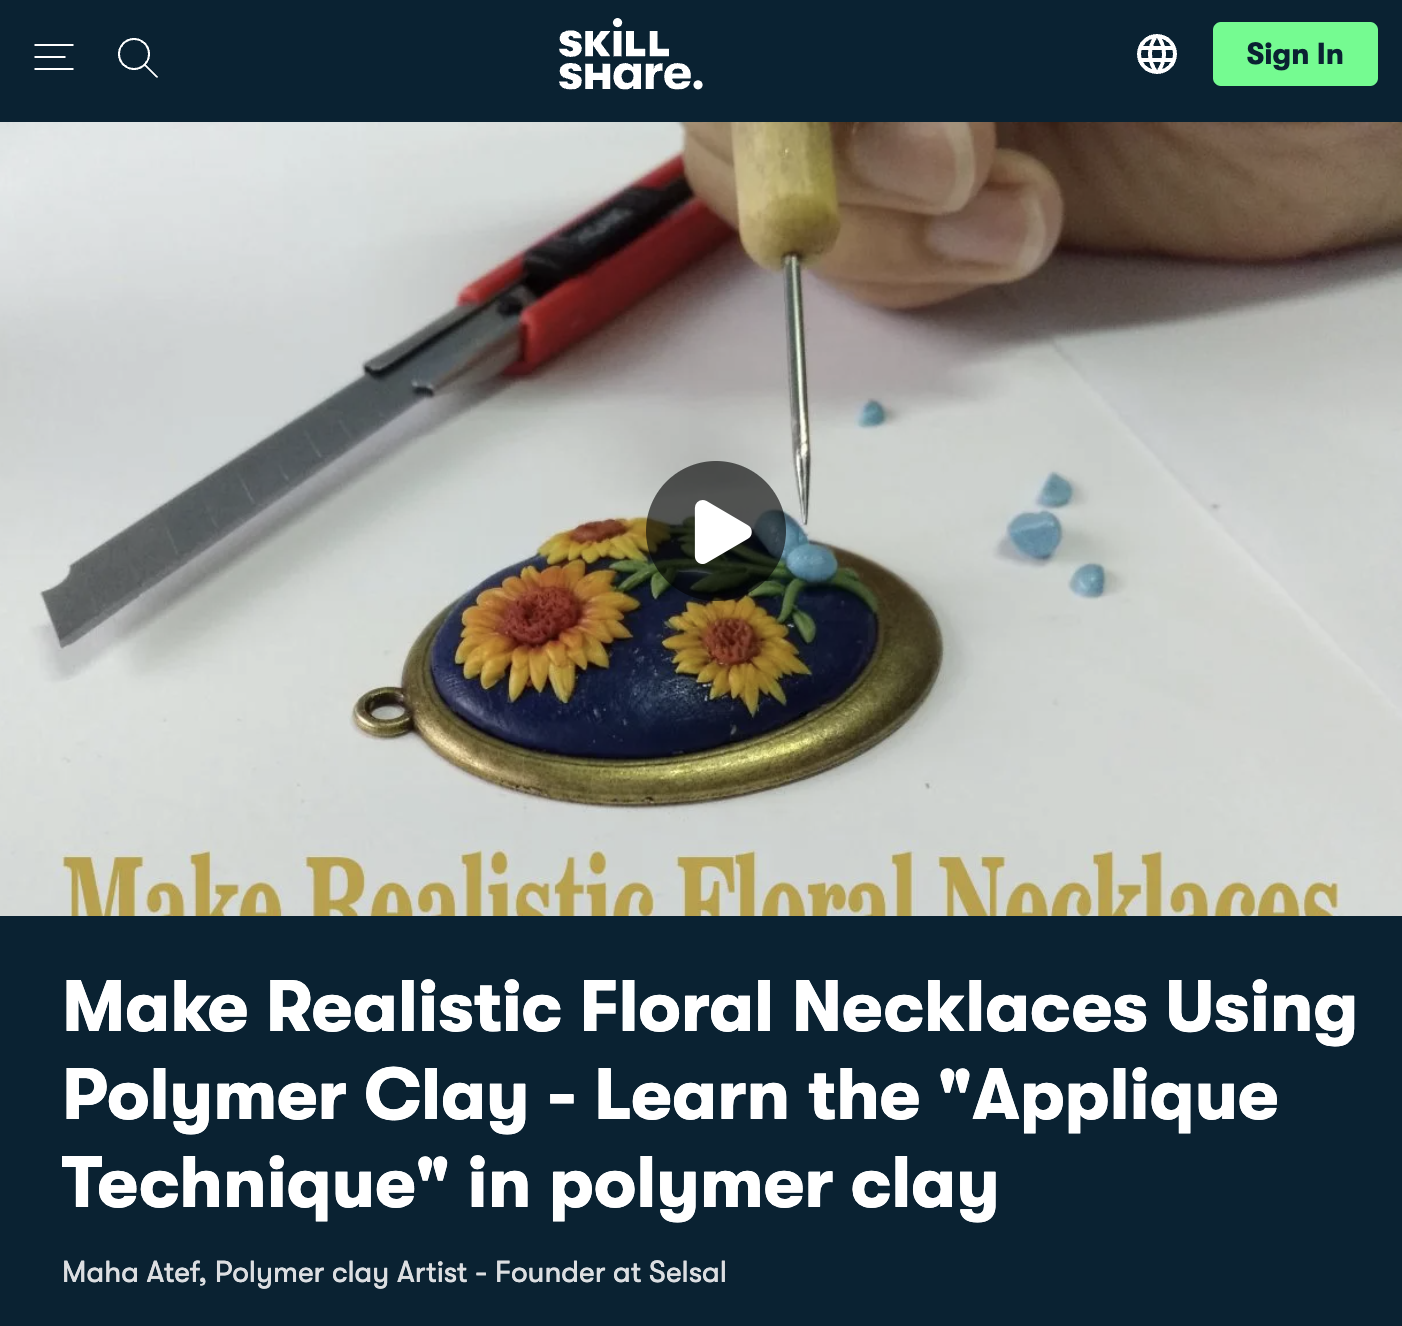 Make Realistic Floral Necklaces Using Polymer Clay